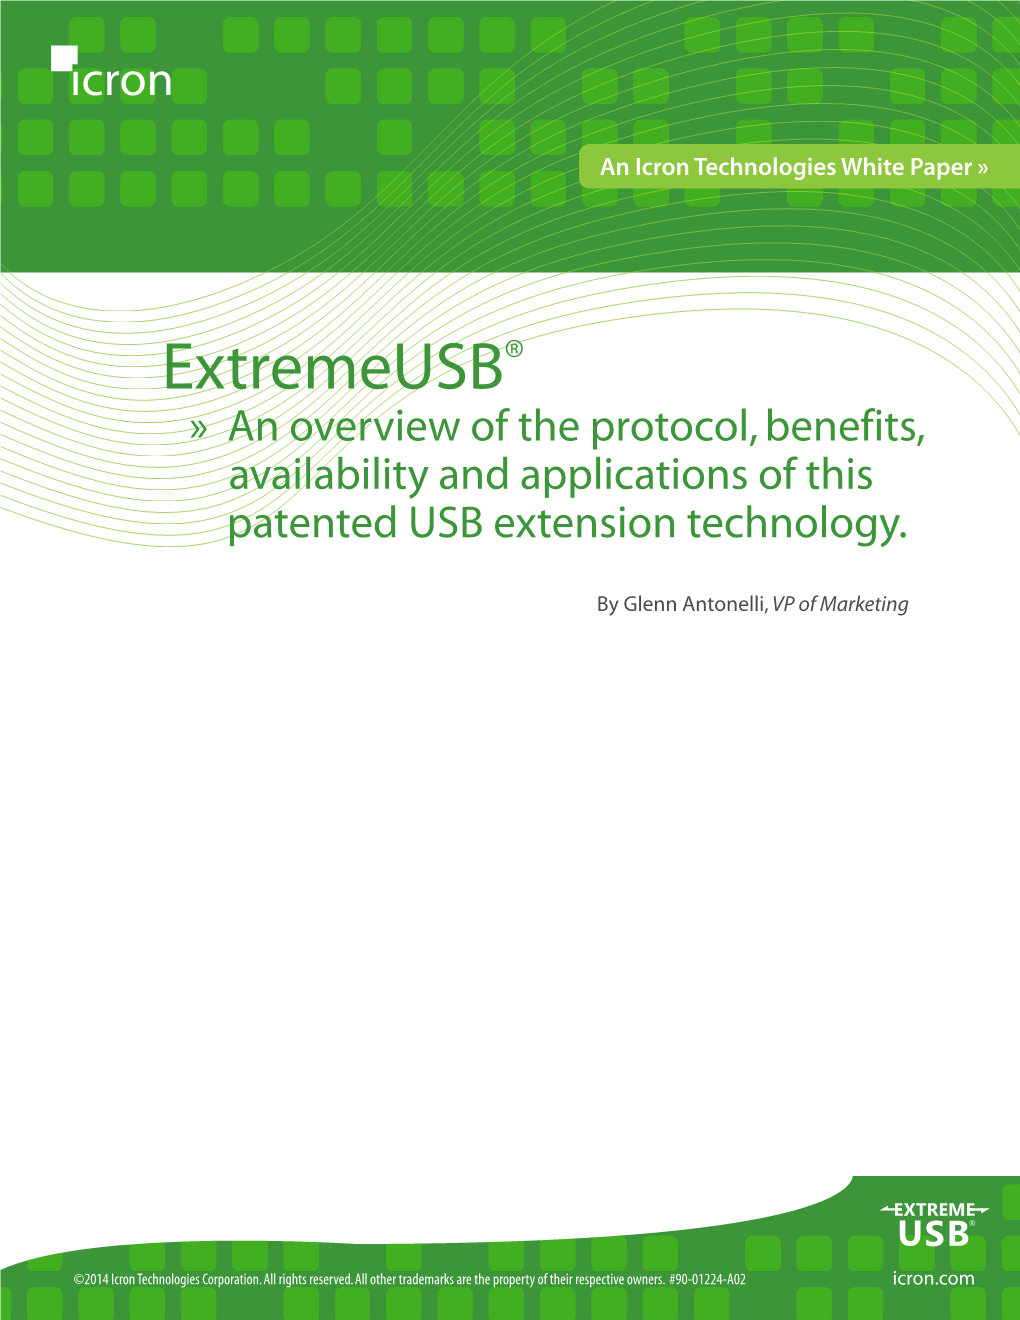 Extremeusb® » an Overview of the Protocol, Benefits, Availability and Applications of This Patented USB Extension Technology